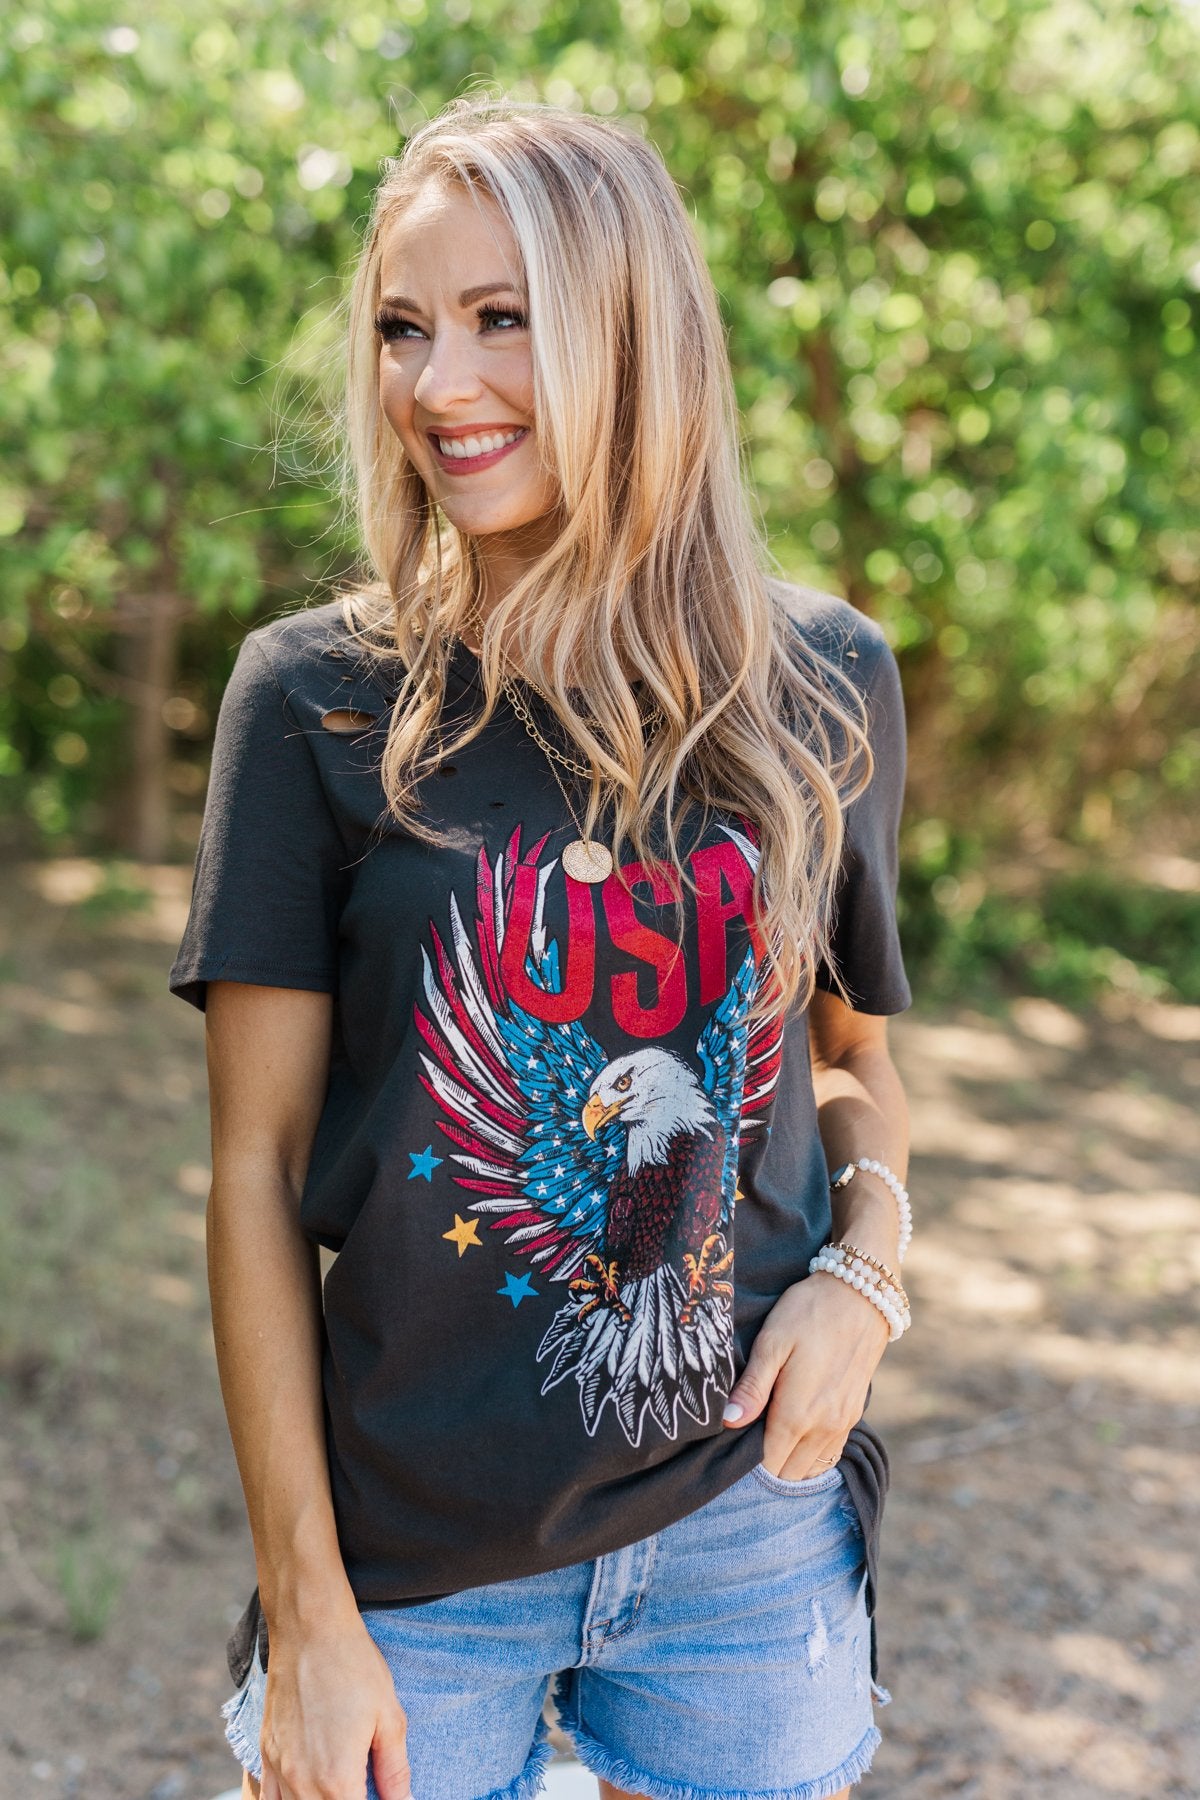 Hooray For The U.S.A. Graphic Top- Black